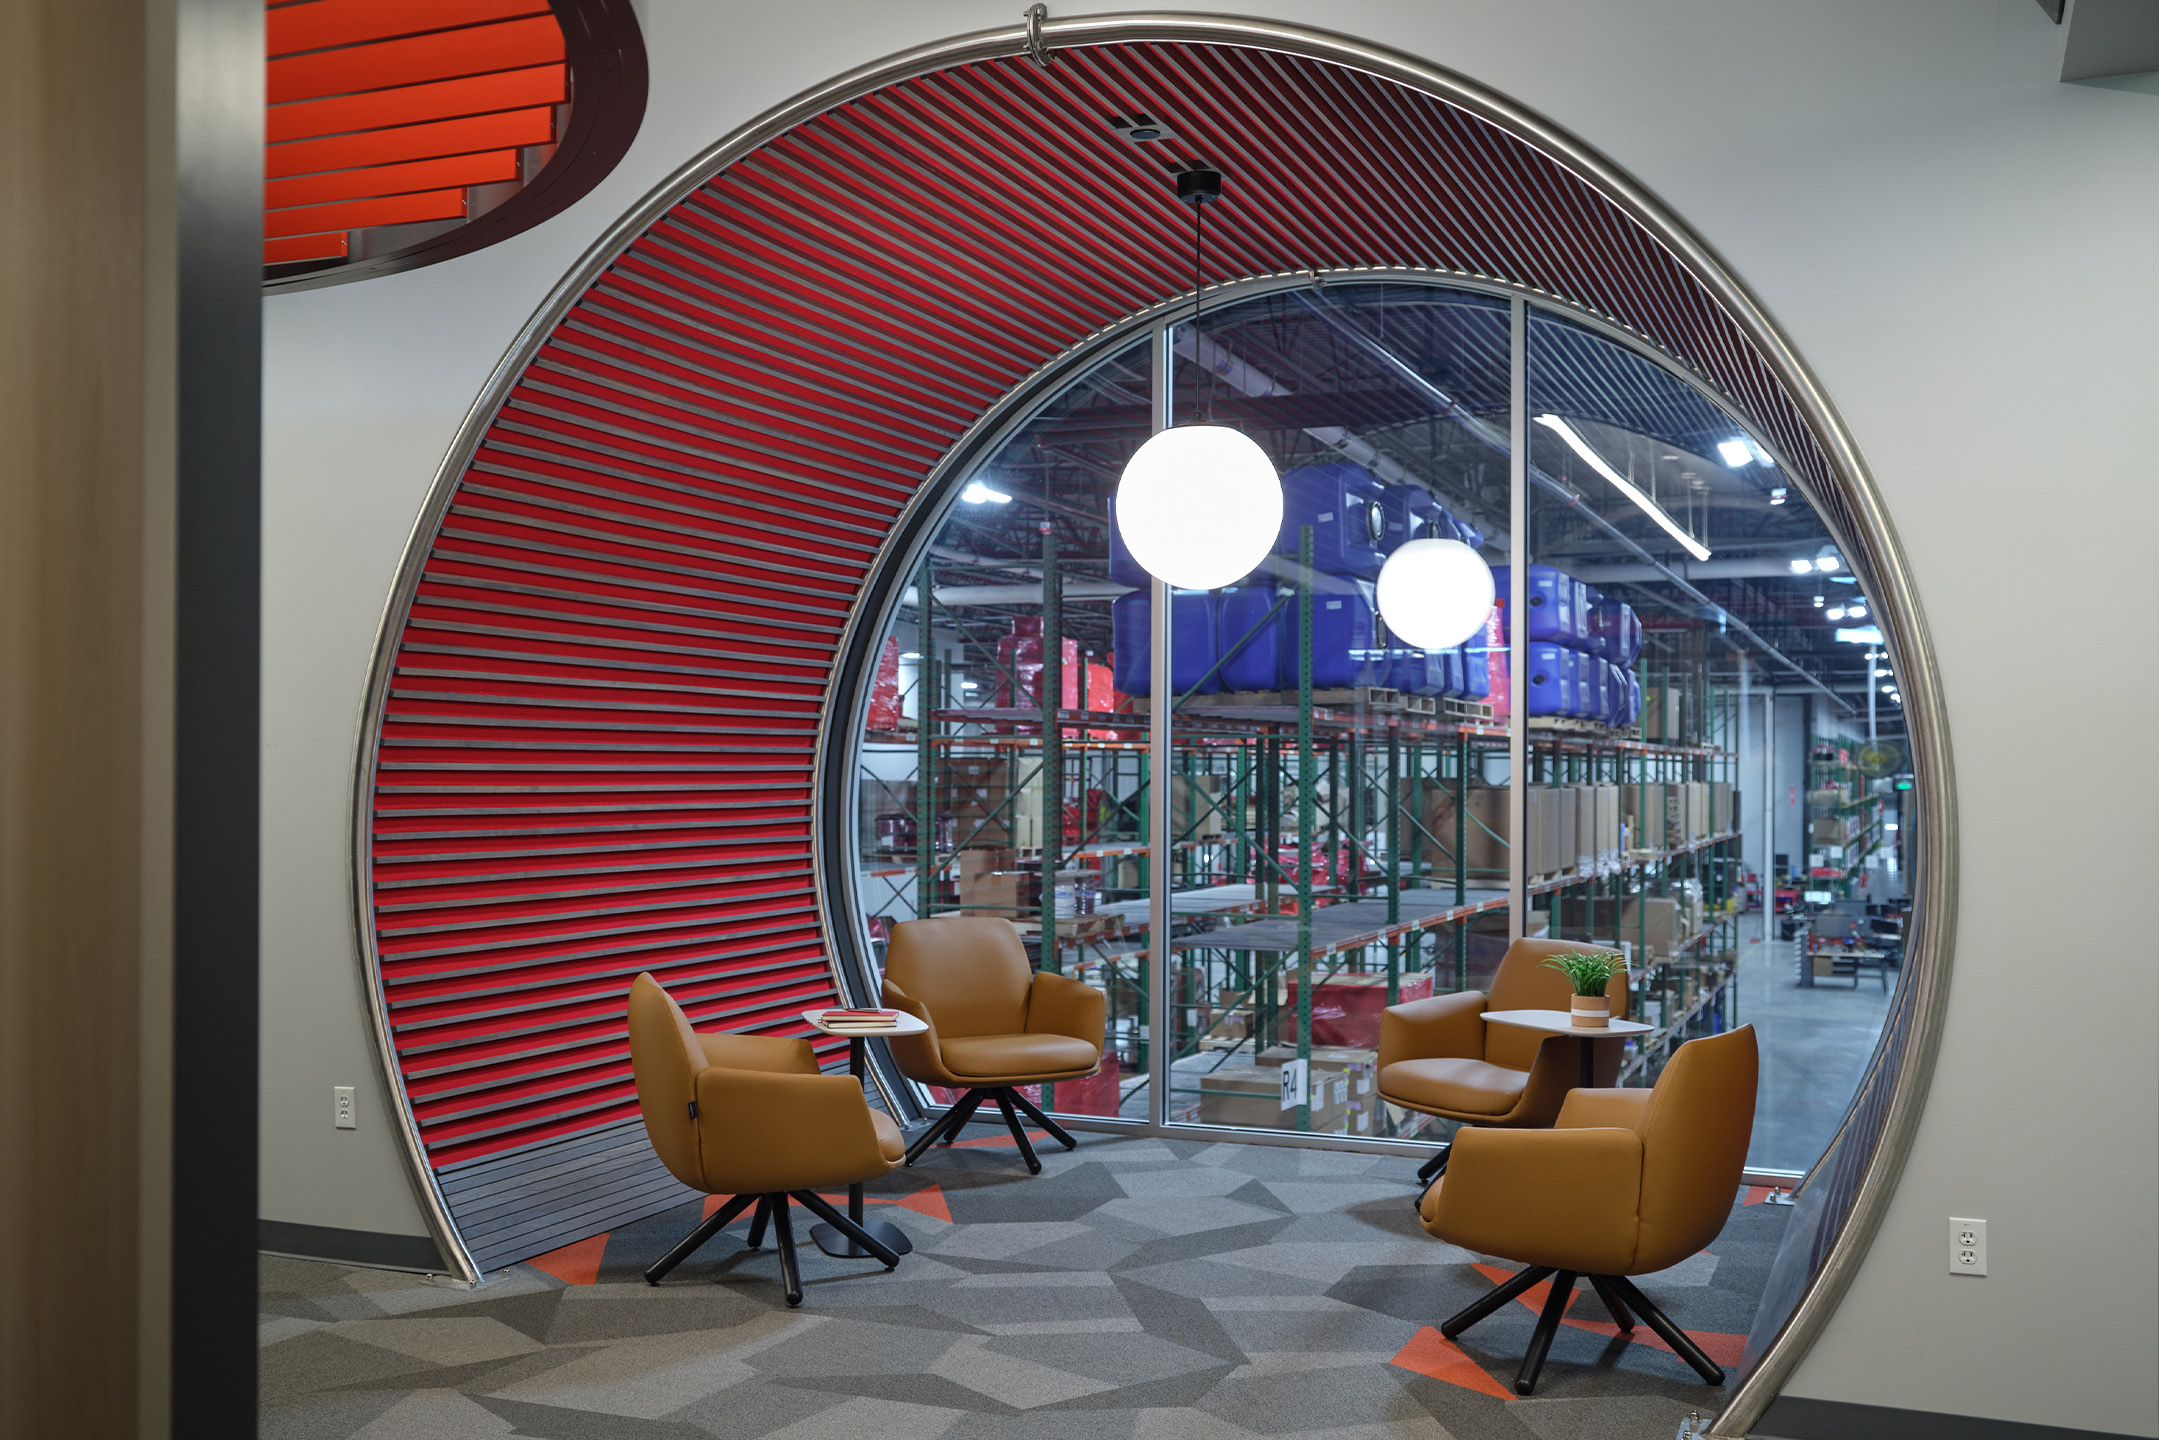 Haworth Poppy chairs in Tommy's car wash collaboration space